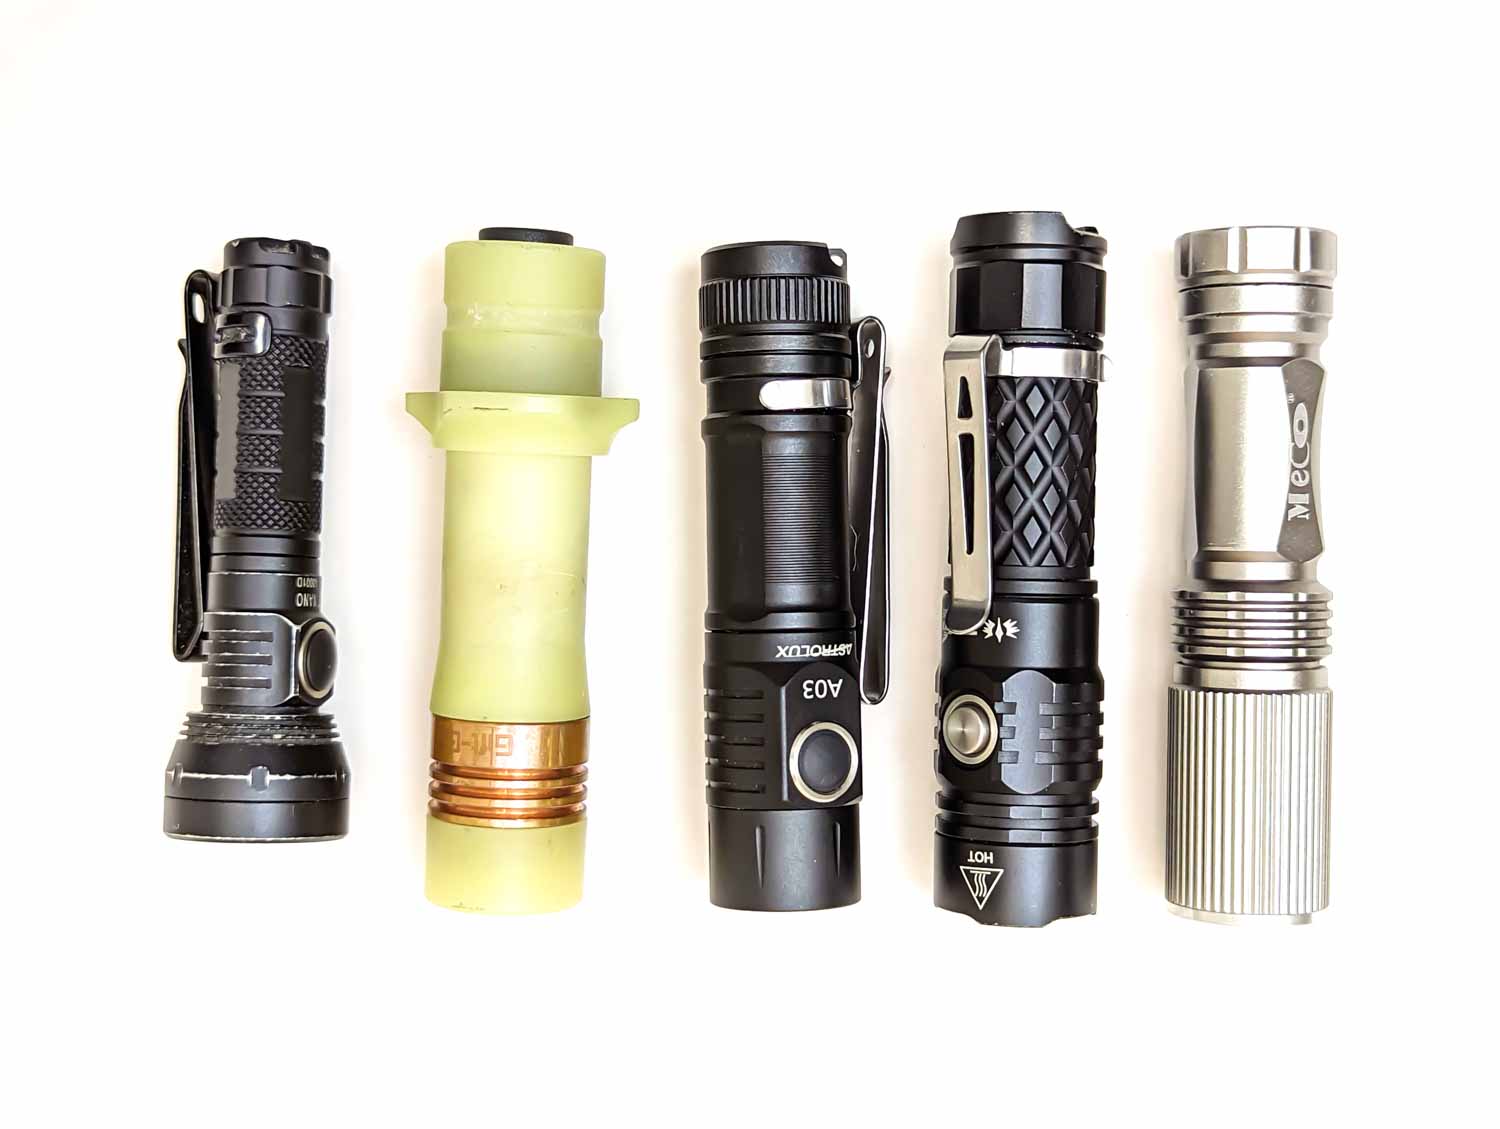 Astrolux A03 compared to other flashlights